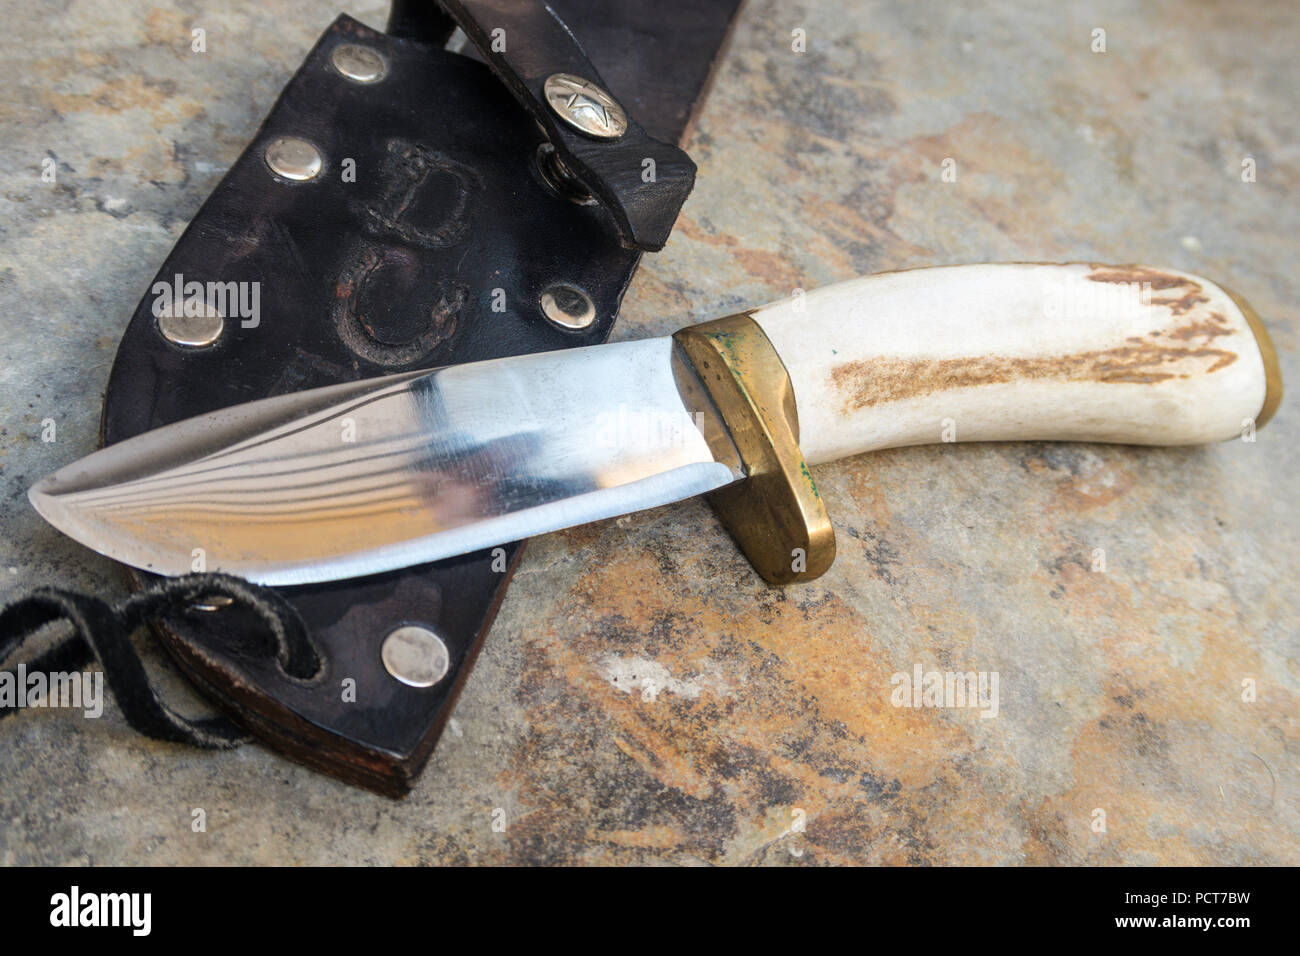 Still Life of Handcrafted Hunting Knife, USA Stock Photo